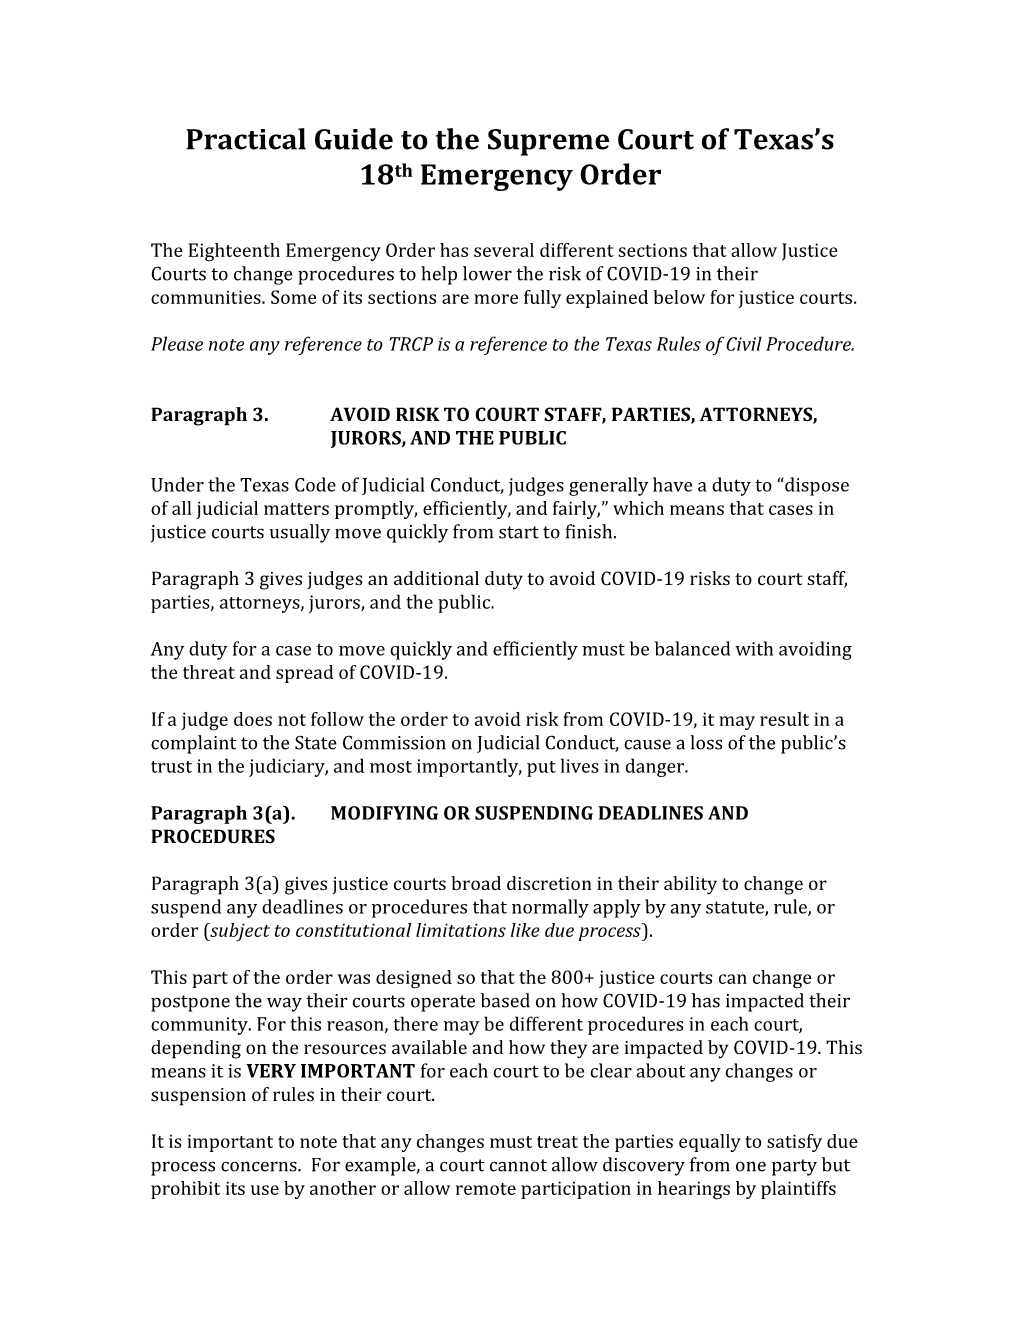 Practical Guide to the Supreme Court of Texas's 18Th Emergency Order